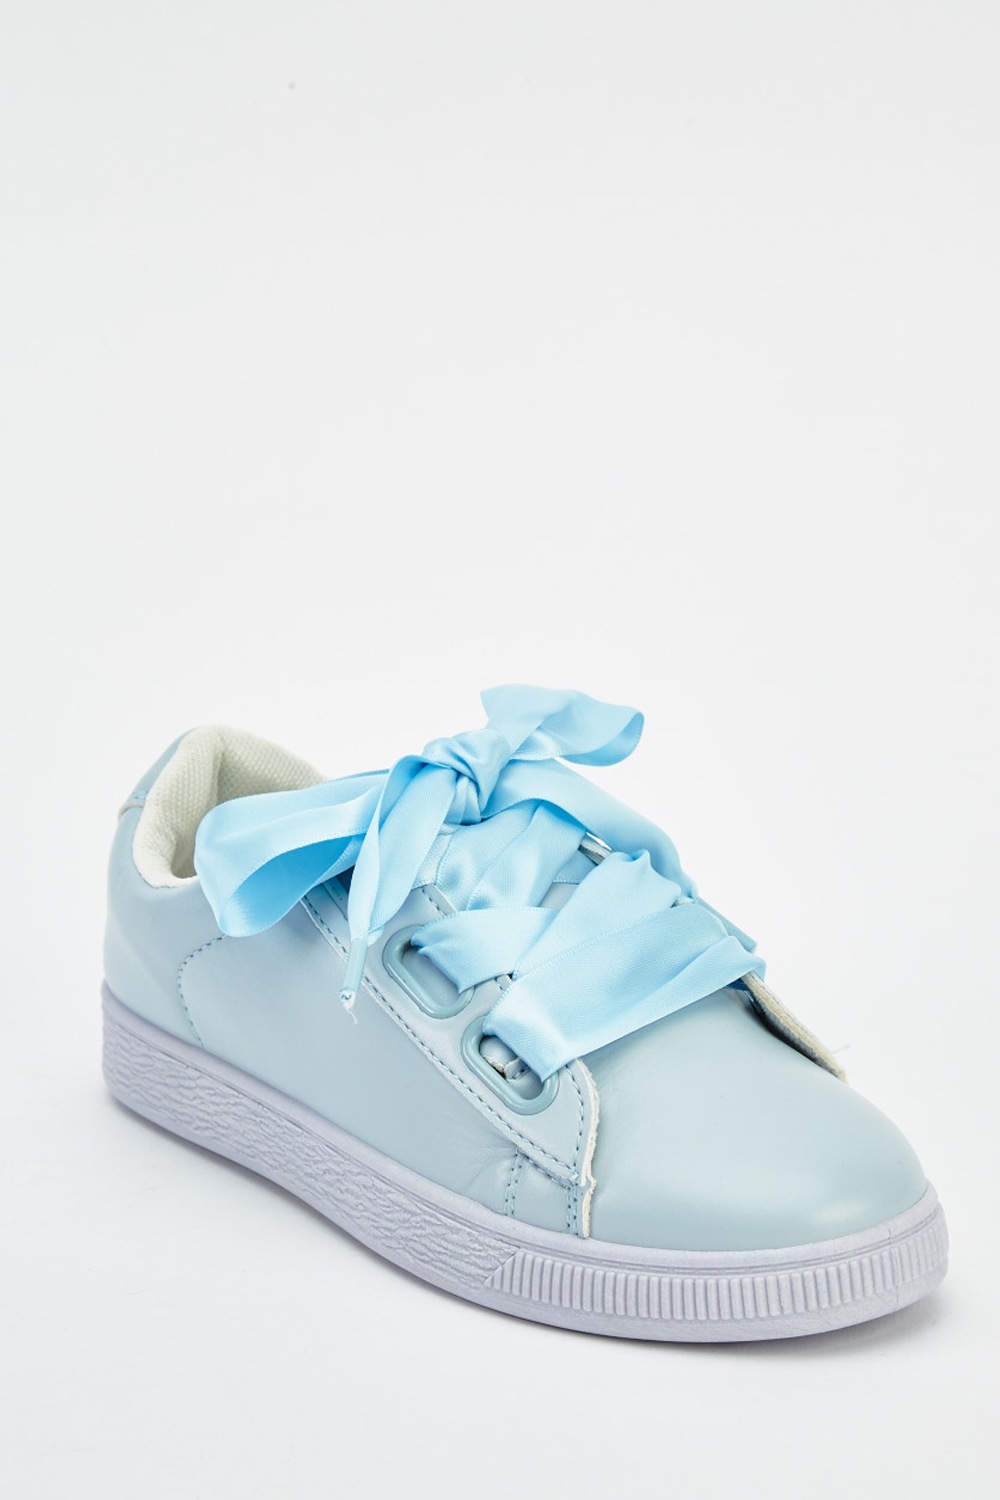 Ribbon Lace Up Faux Leather Trainers - Blue - Just £5